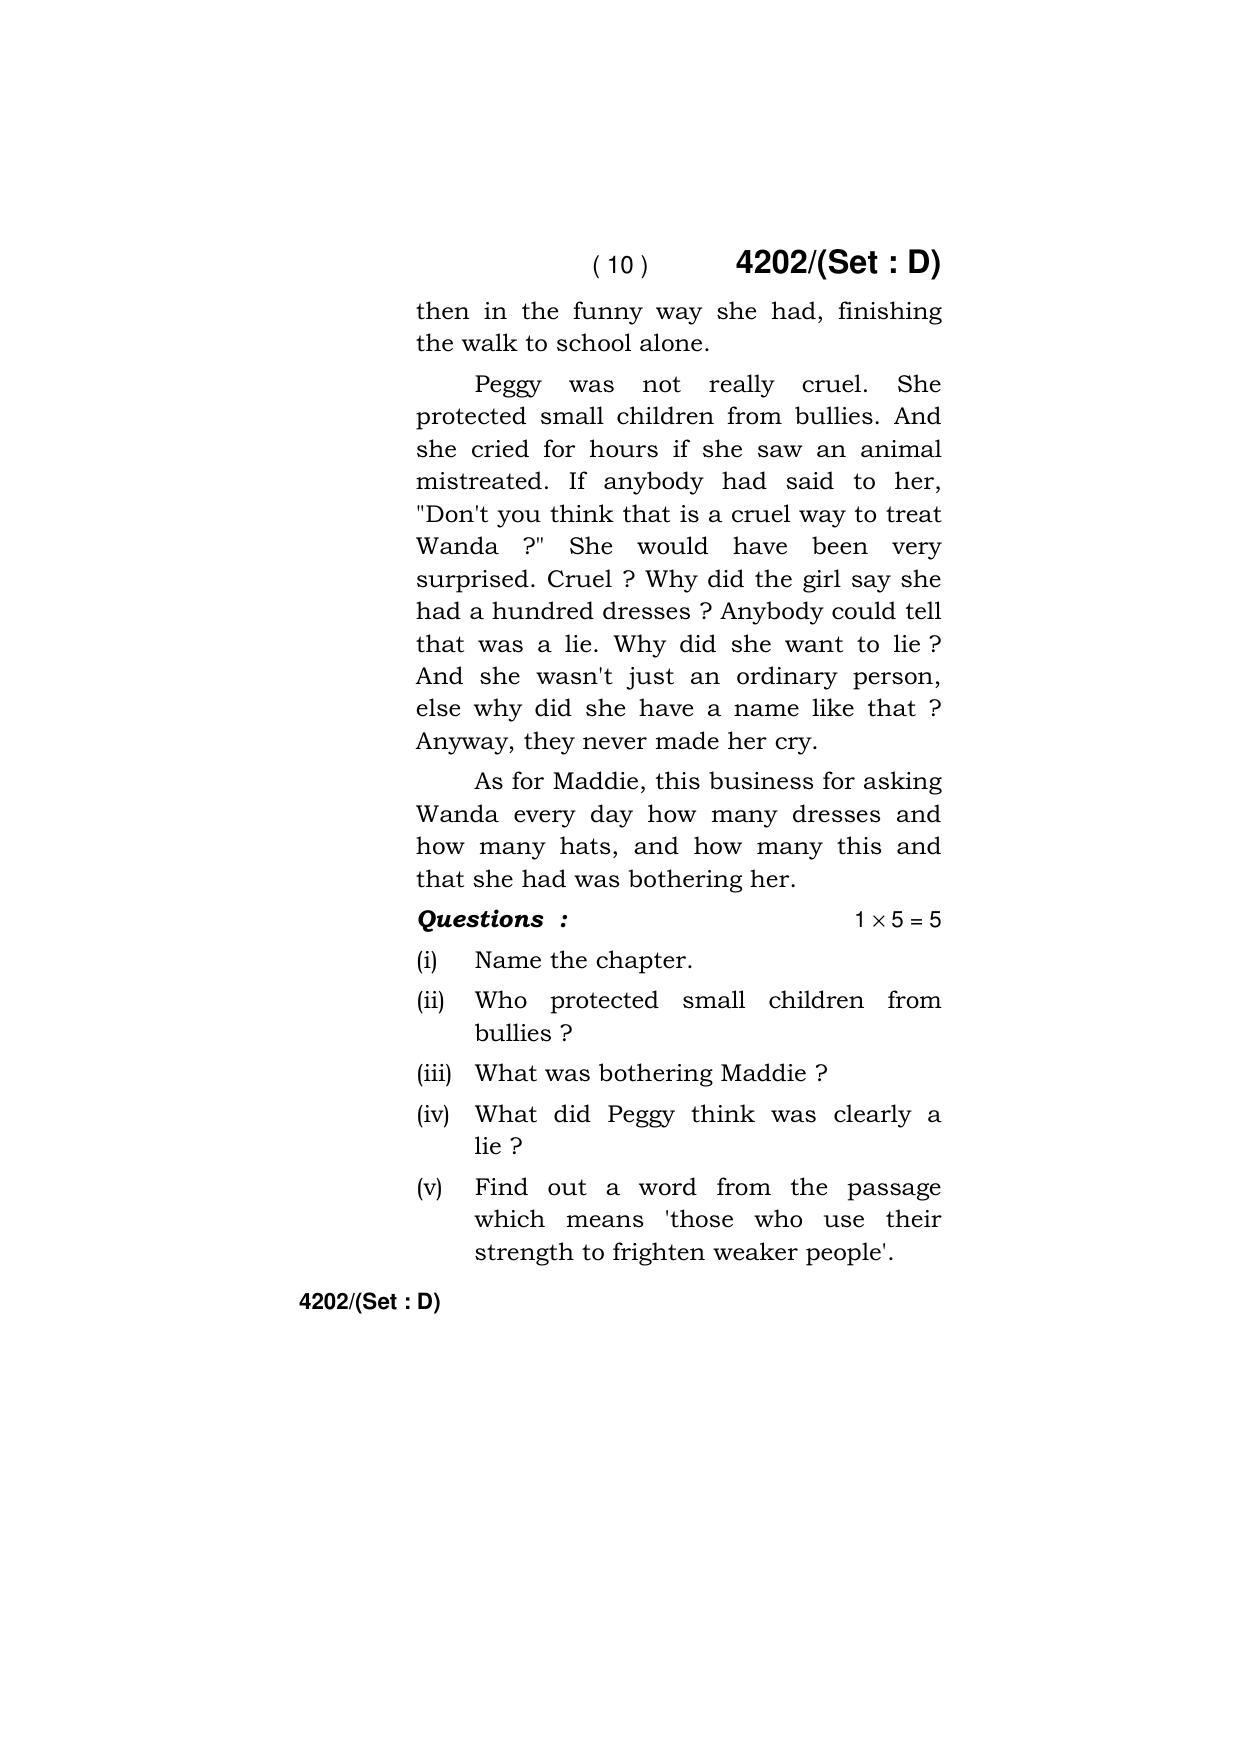 Haryana Board HBSE Class 10 English (All Set) 2019 Question Paper - Page 58